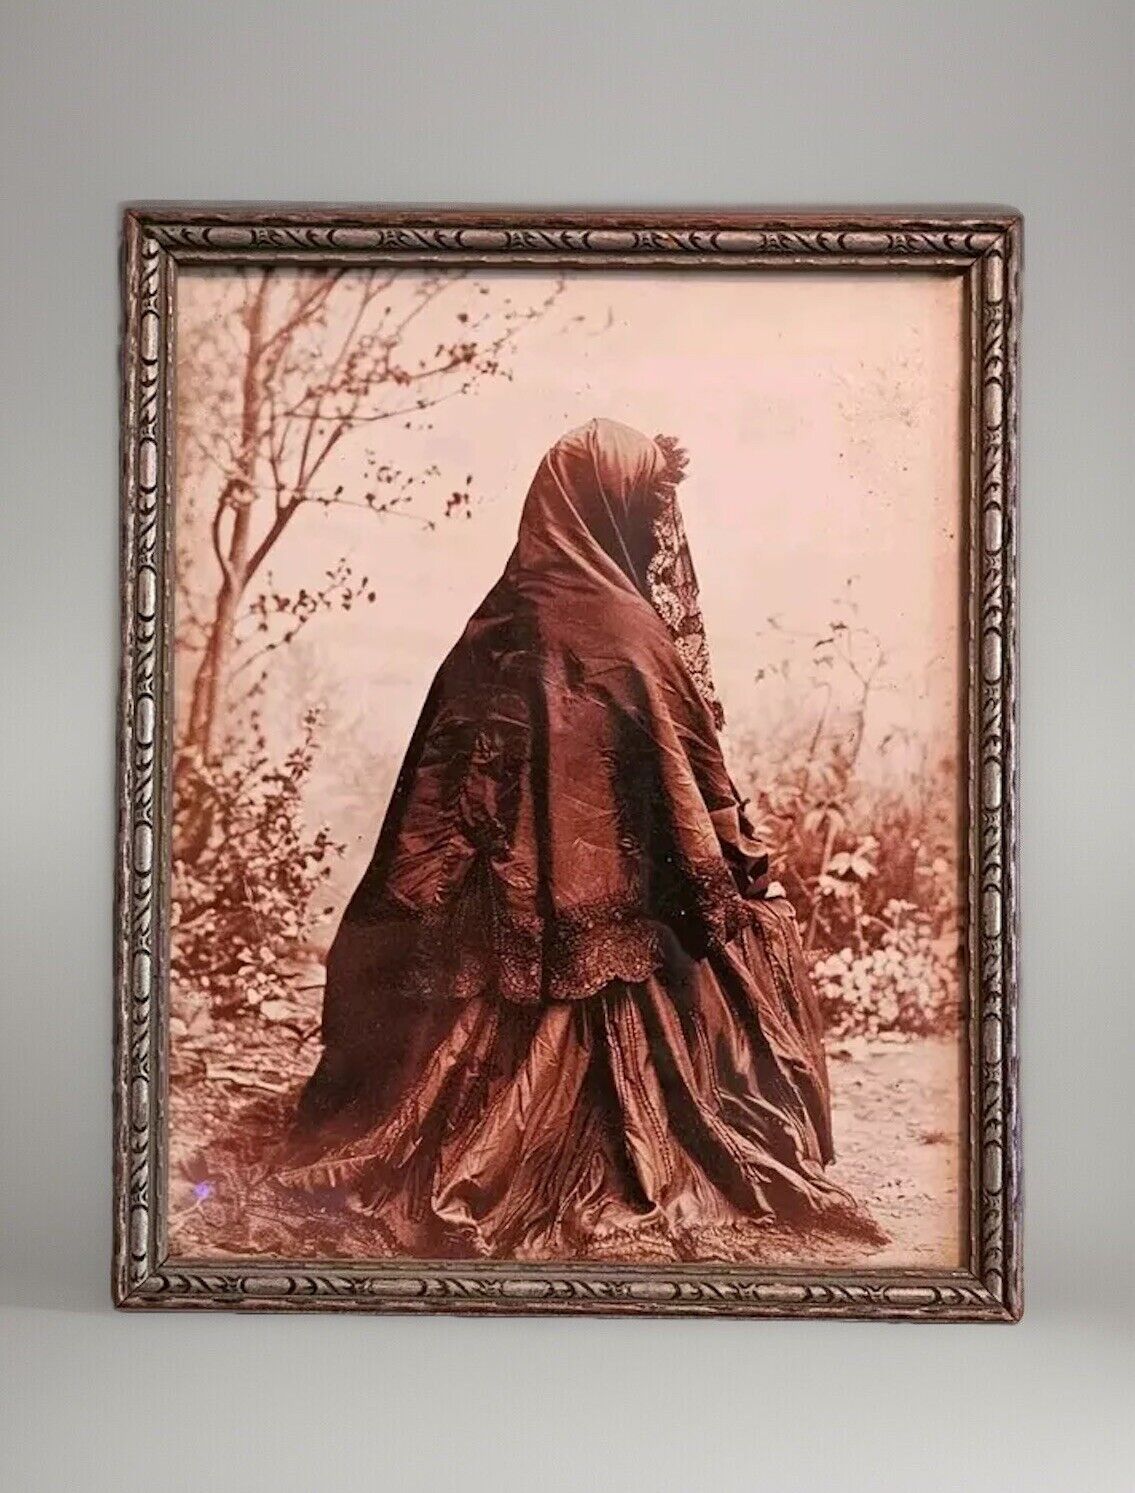 Mourning Victorian Woman Photo 1800s In Beautiful Aged Vintage Frame